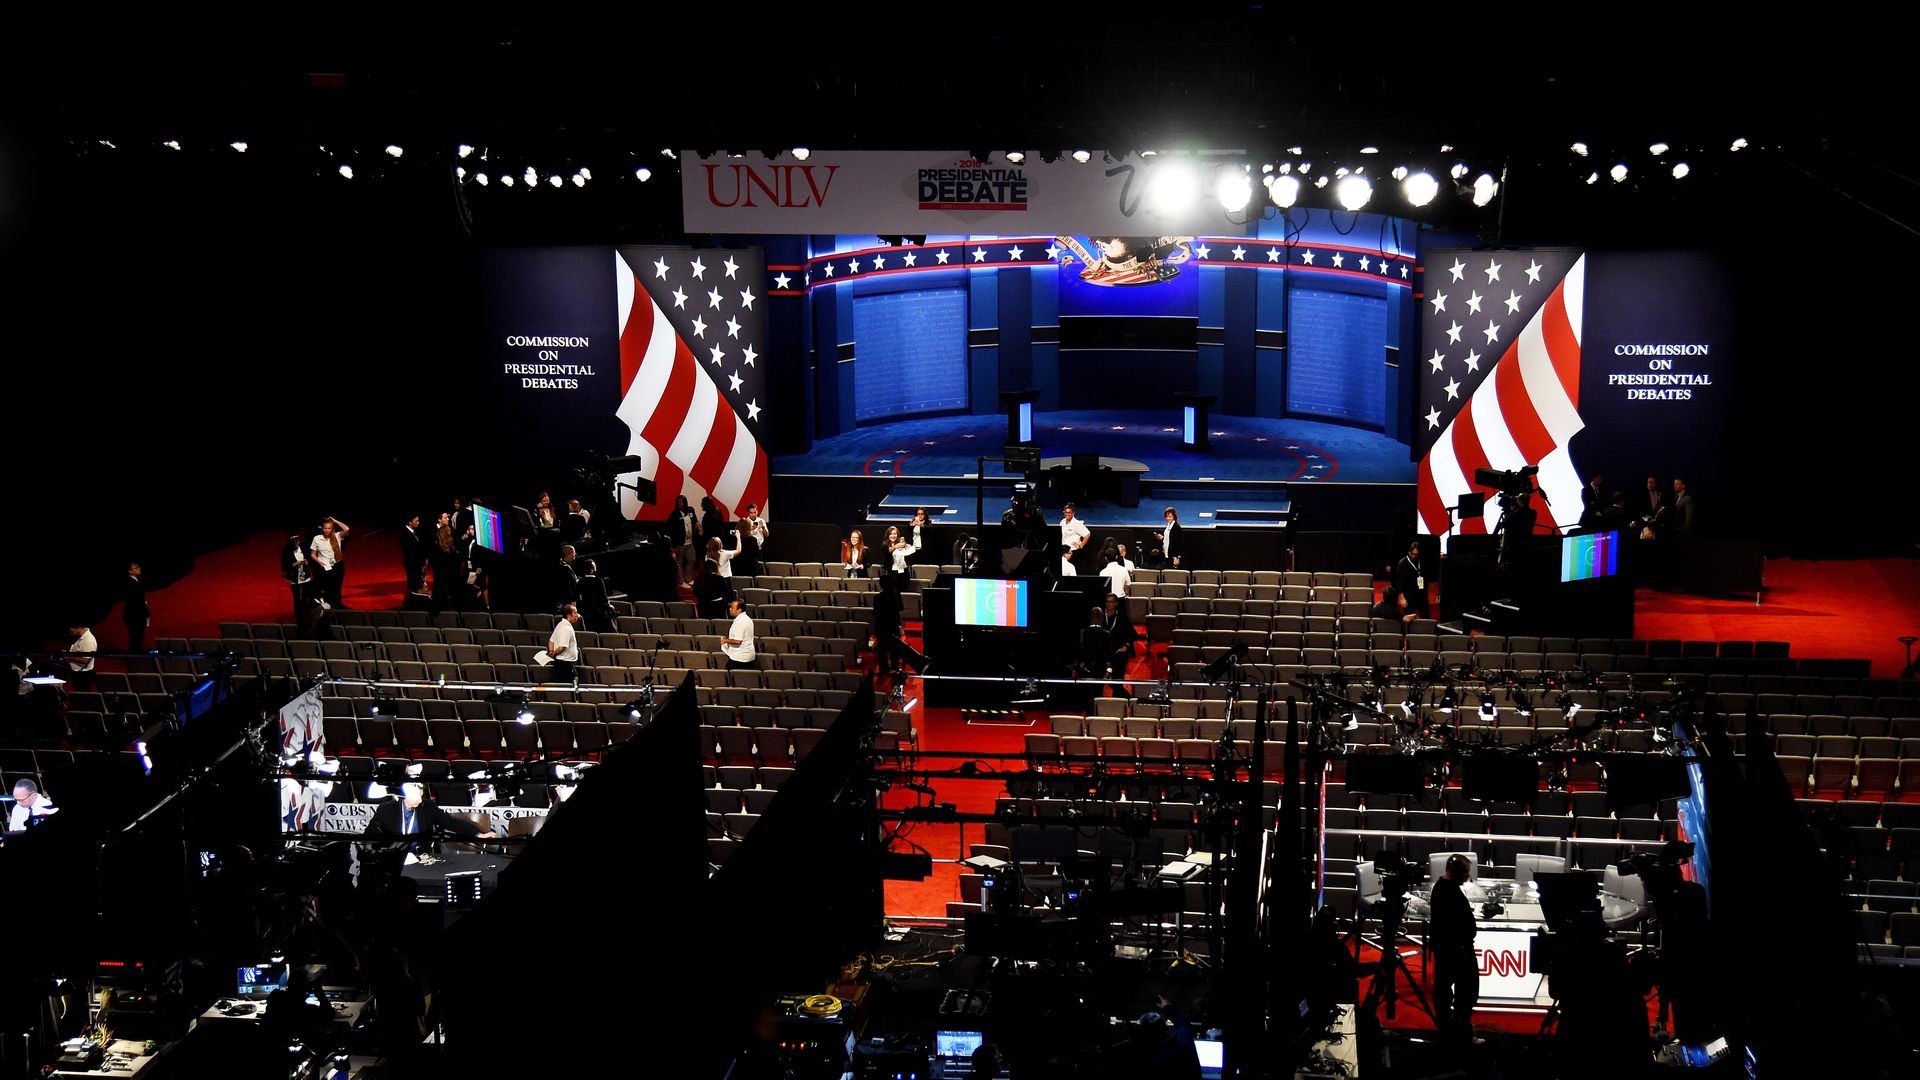 NBC News to host first Democratic debate in Miami - Axios1920 x 1080